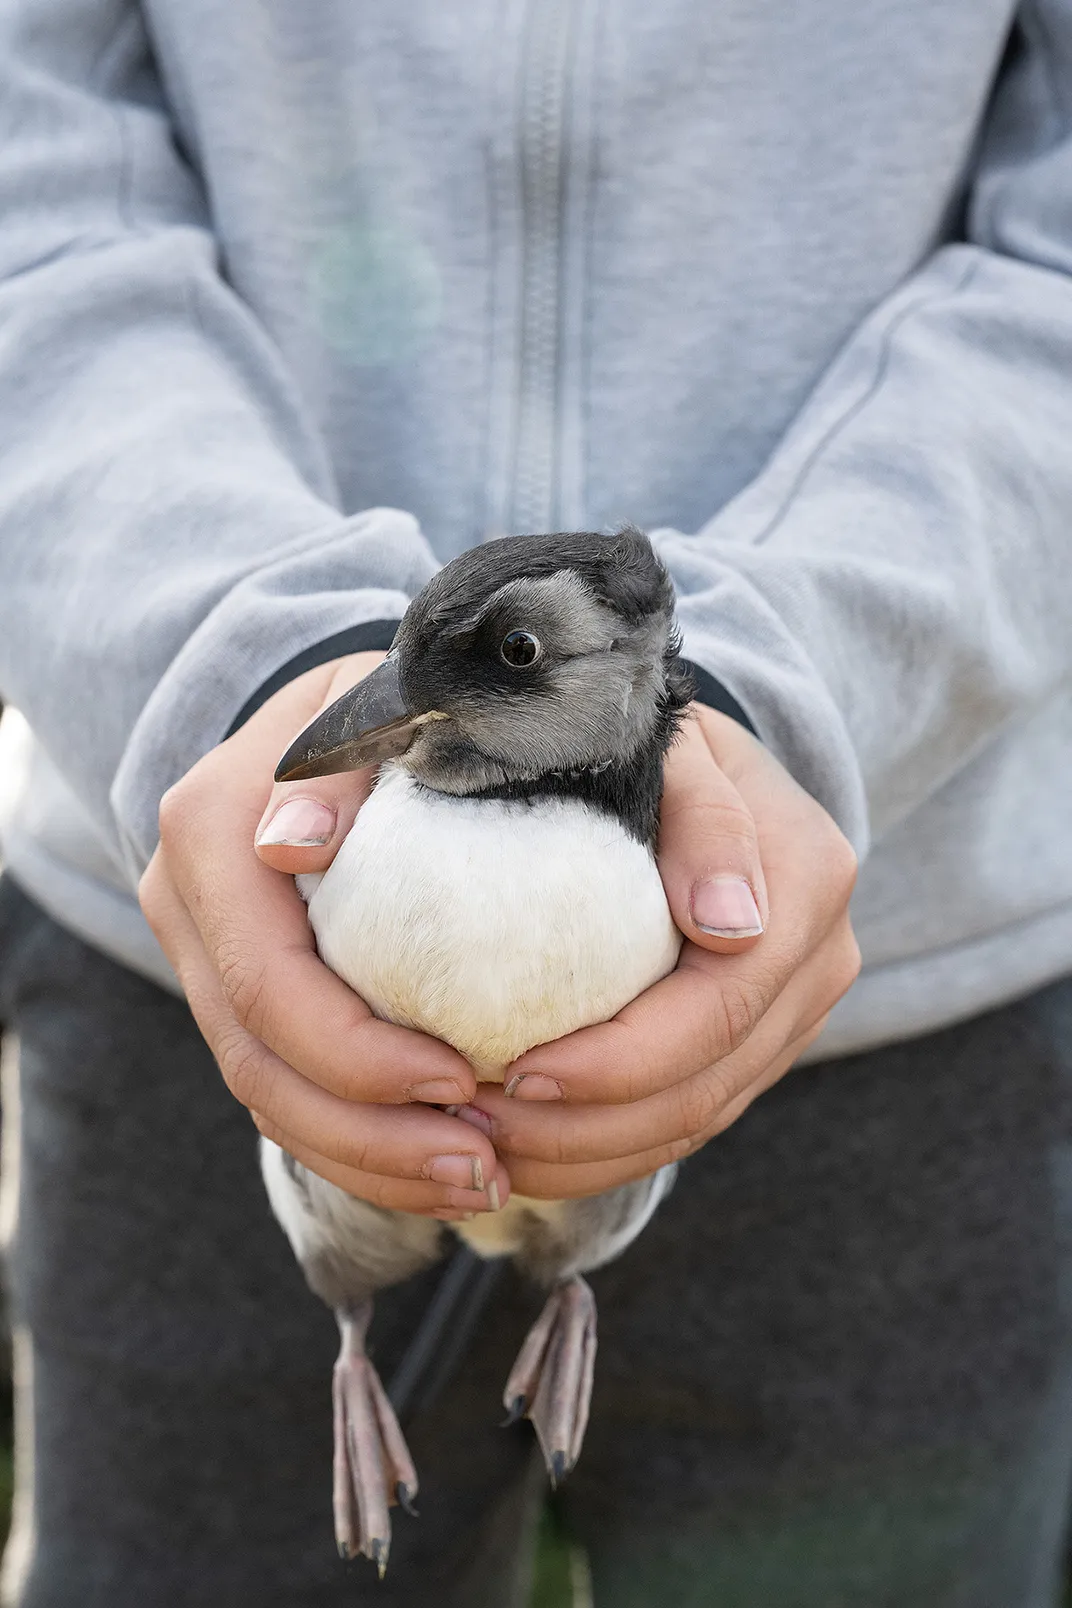 Anton Ingi Eiriksson holds a puffling that he captured the night before.